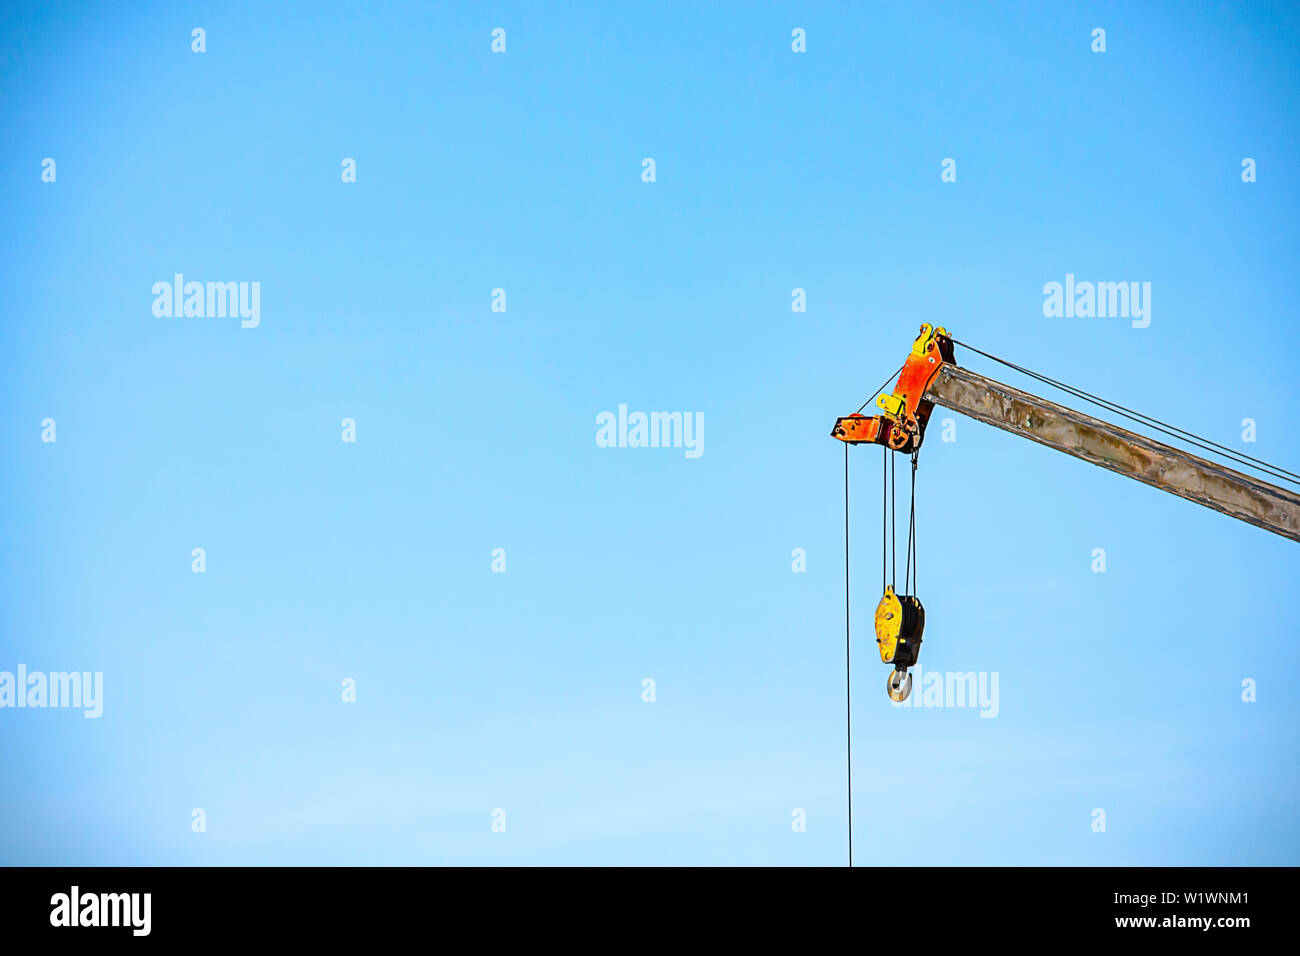 Sling and hoist the crane arm The background sky Stock Photo